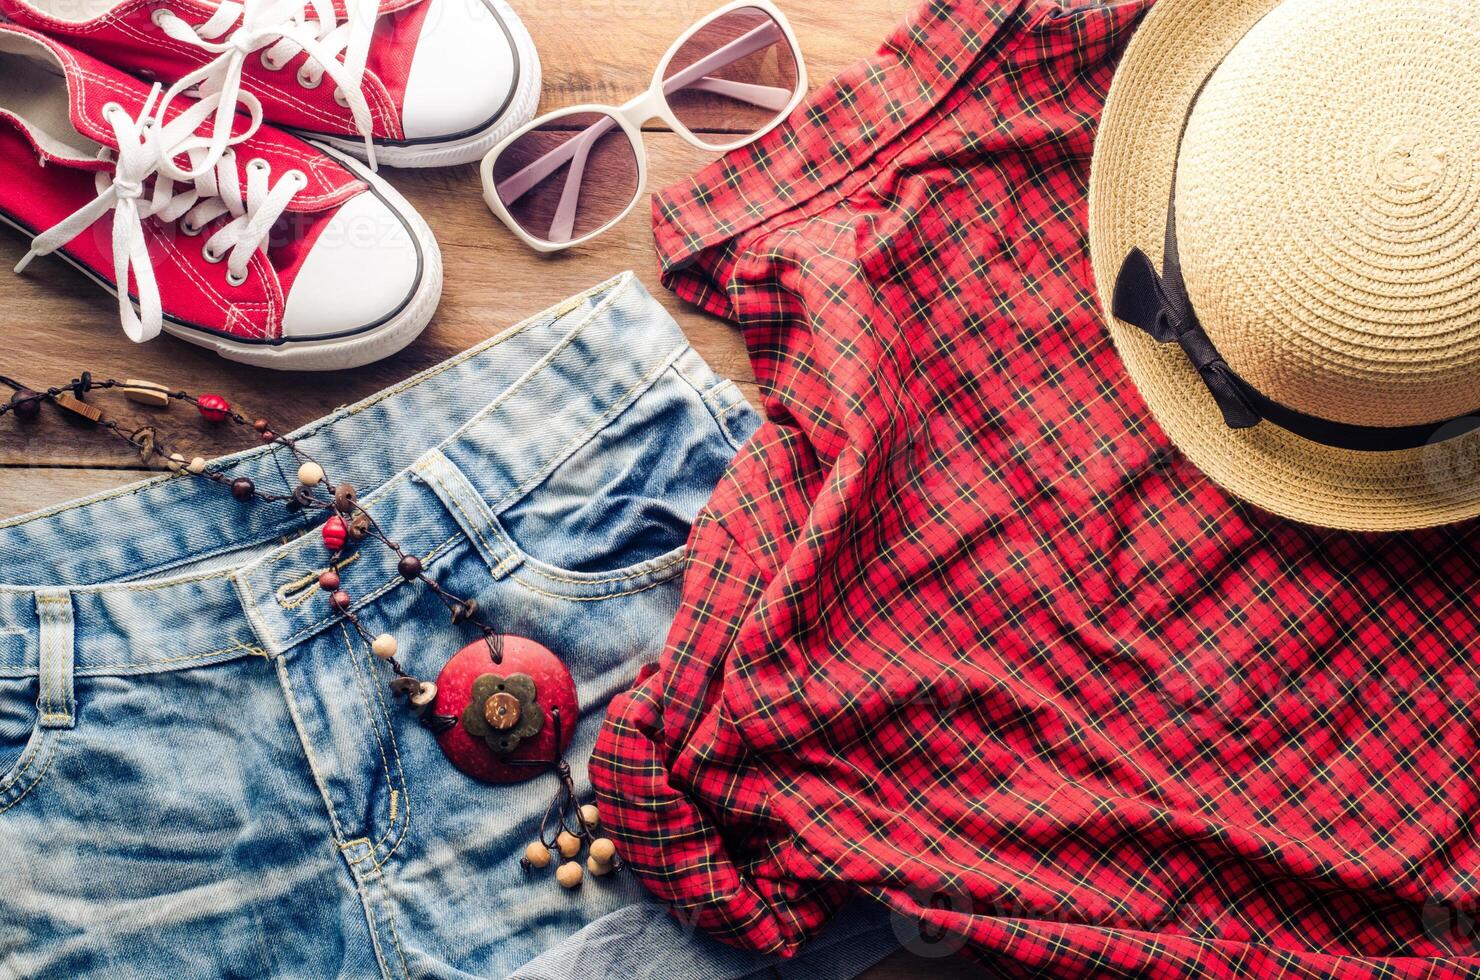 Clothing and accessories for women with summer on wood floor photo